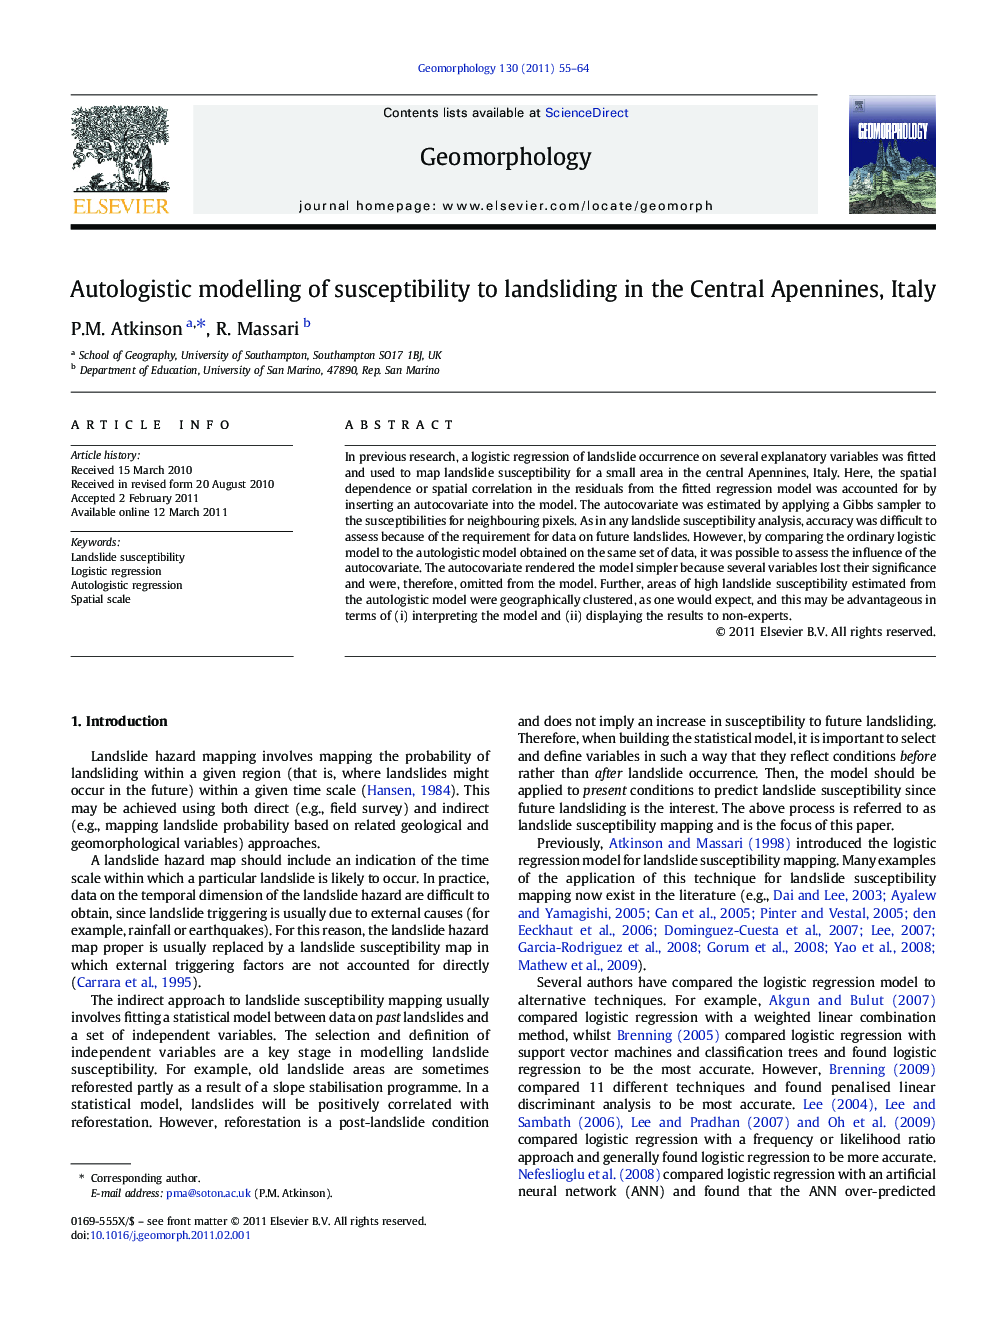 Autologistic modelling of susceptibility to landsliding in the Central Apennines, Italy